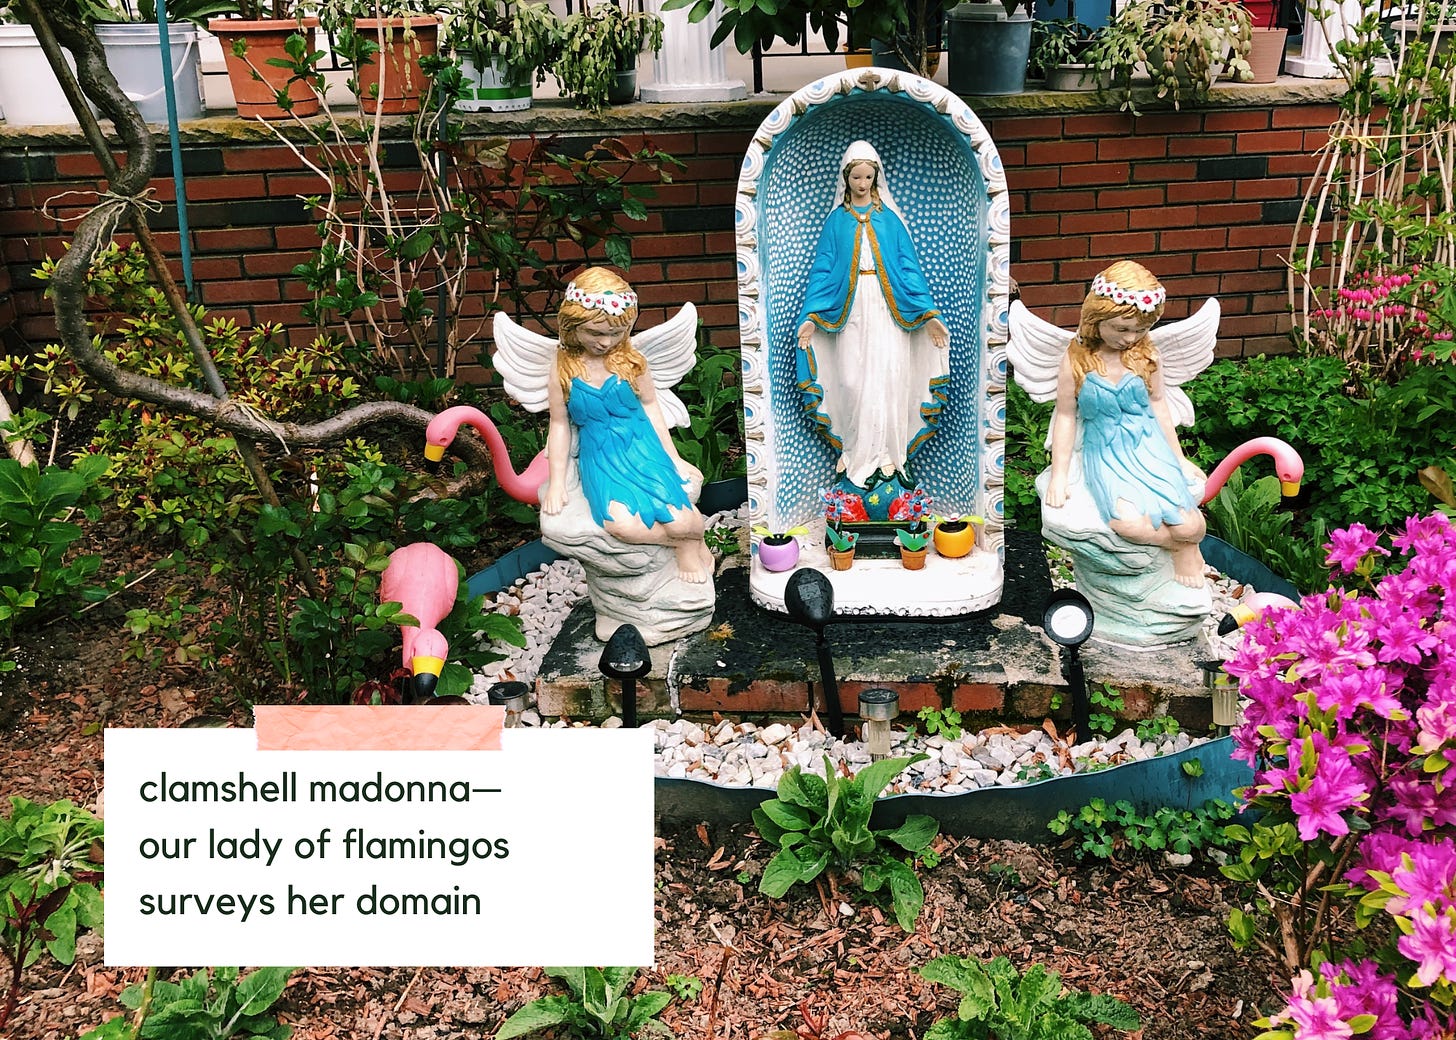 Photo of a yard in which a statue of the Virgin Mary is surrounded by angels, flamingos, and flowers. Text reads: "clamshell madonna— / our lady of flamingos / surveys her domain"